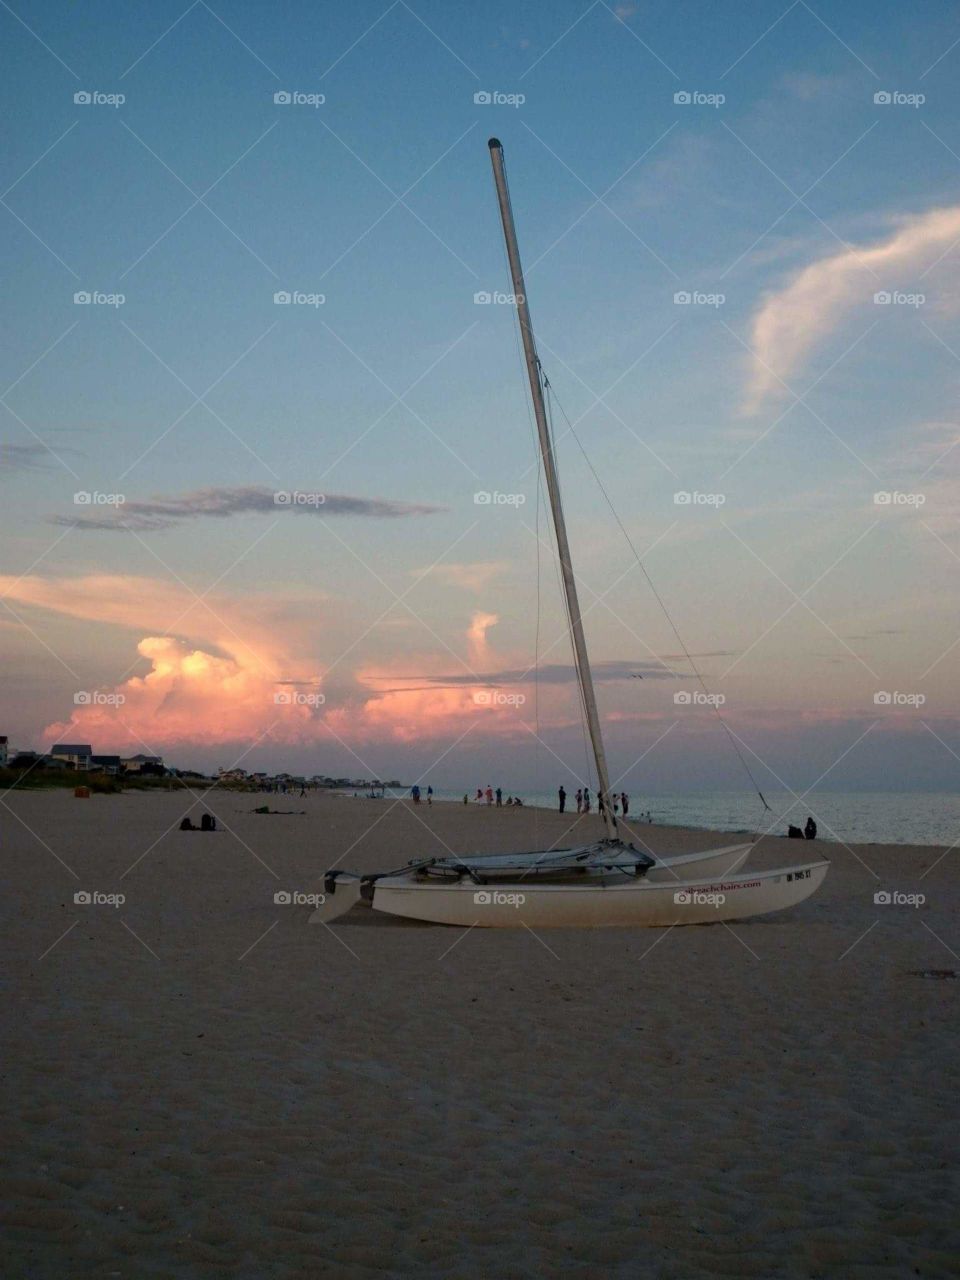 sail boat in the sunset . saw this on the beach in St George Island love sailboats and sunsets 